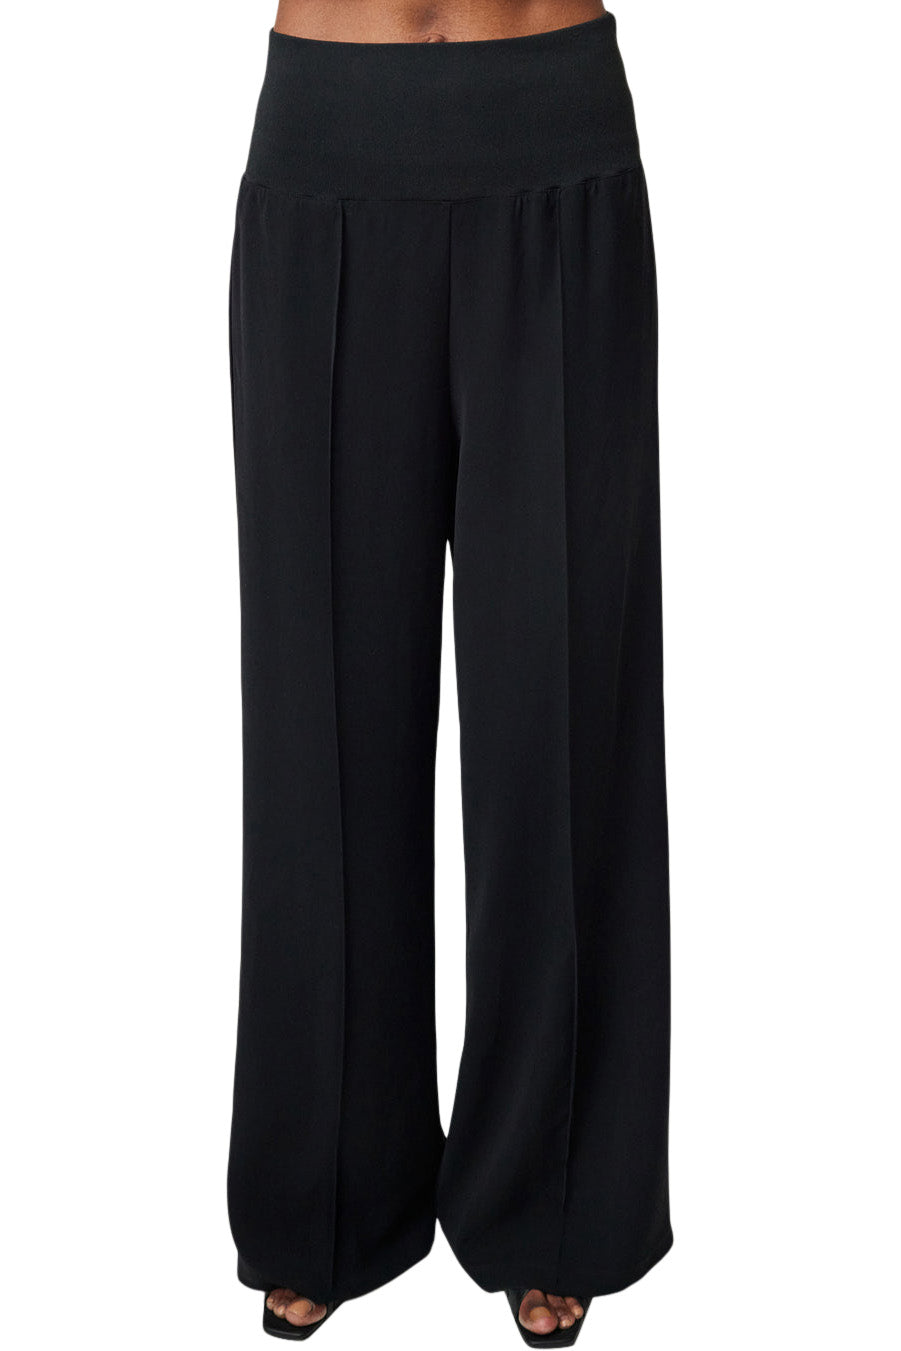 ATM Crepe Twill Palazzo Pants in Black